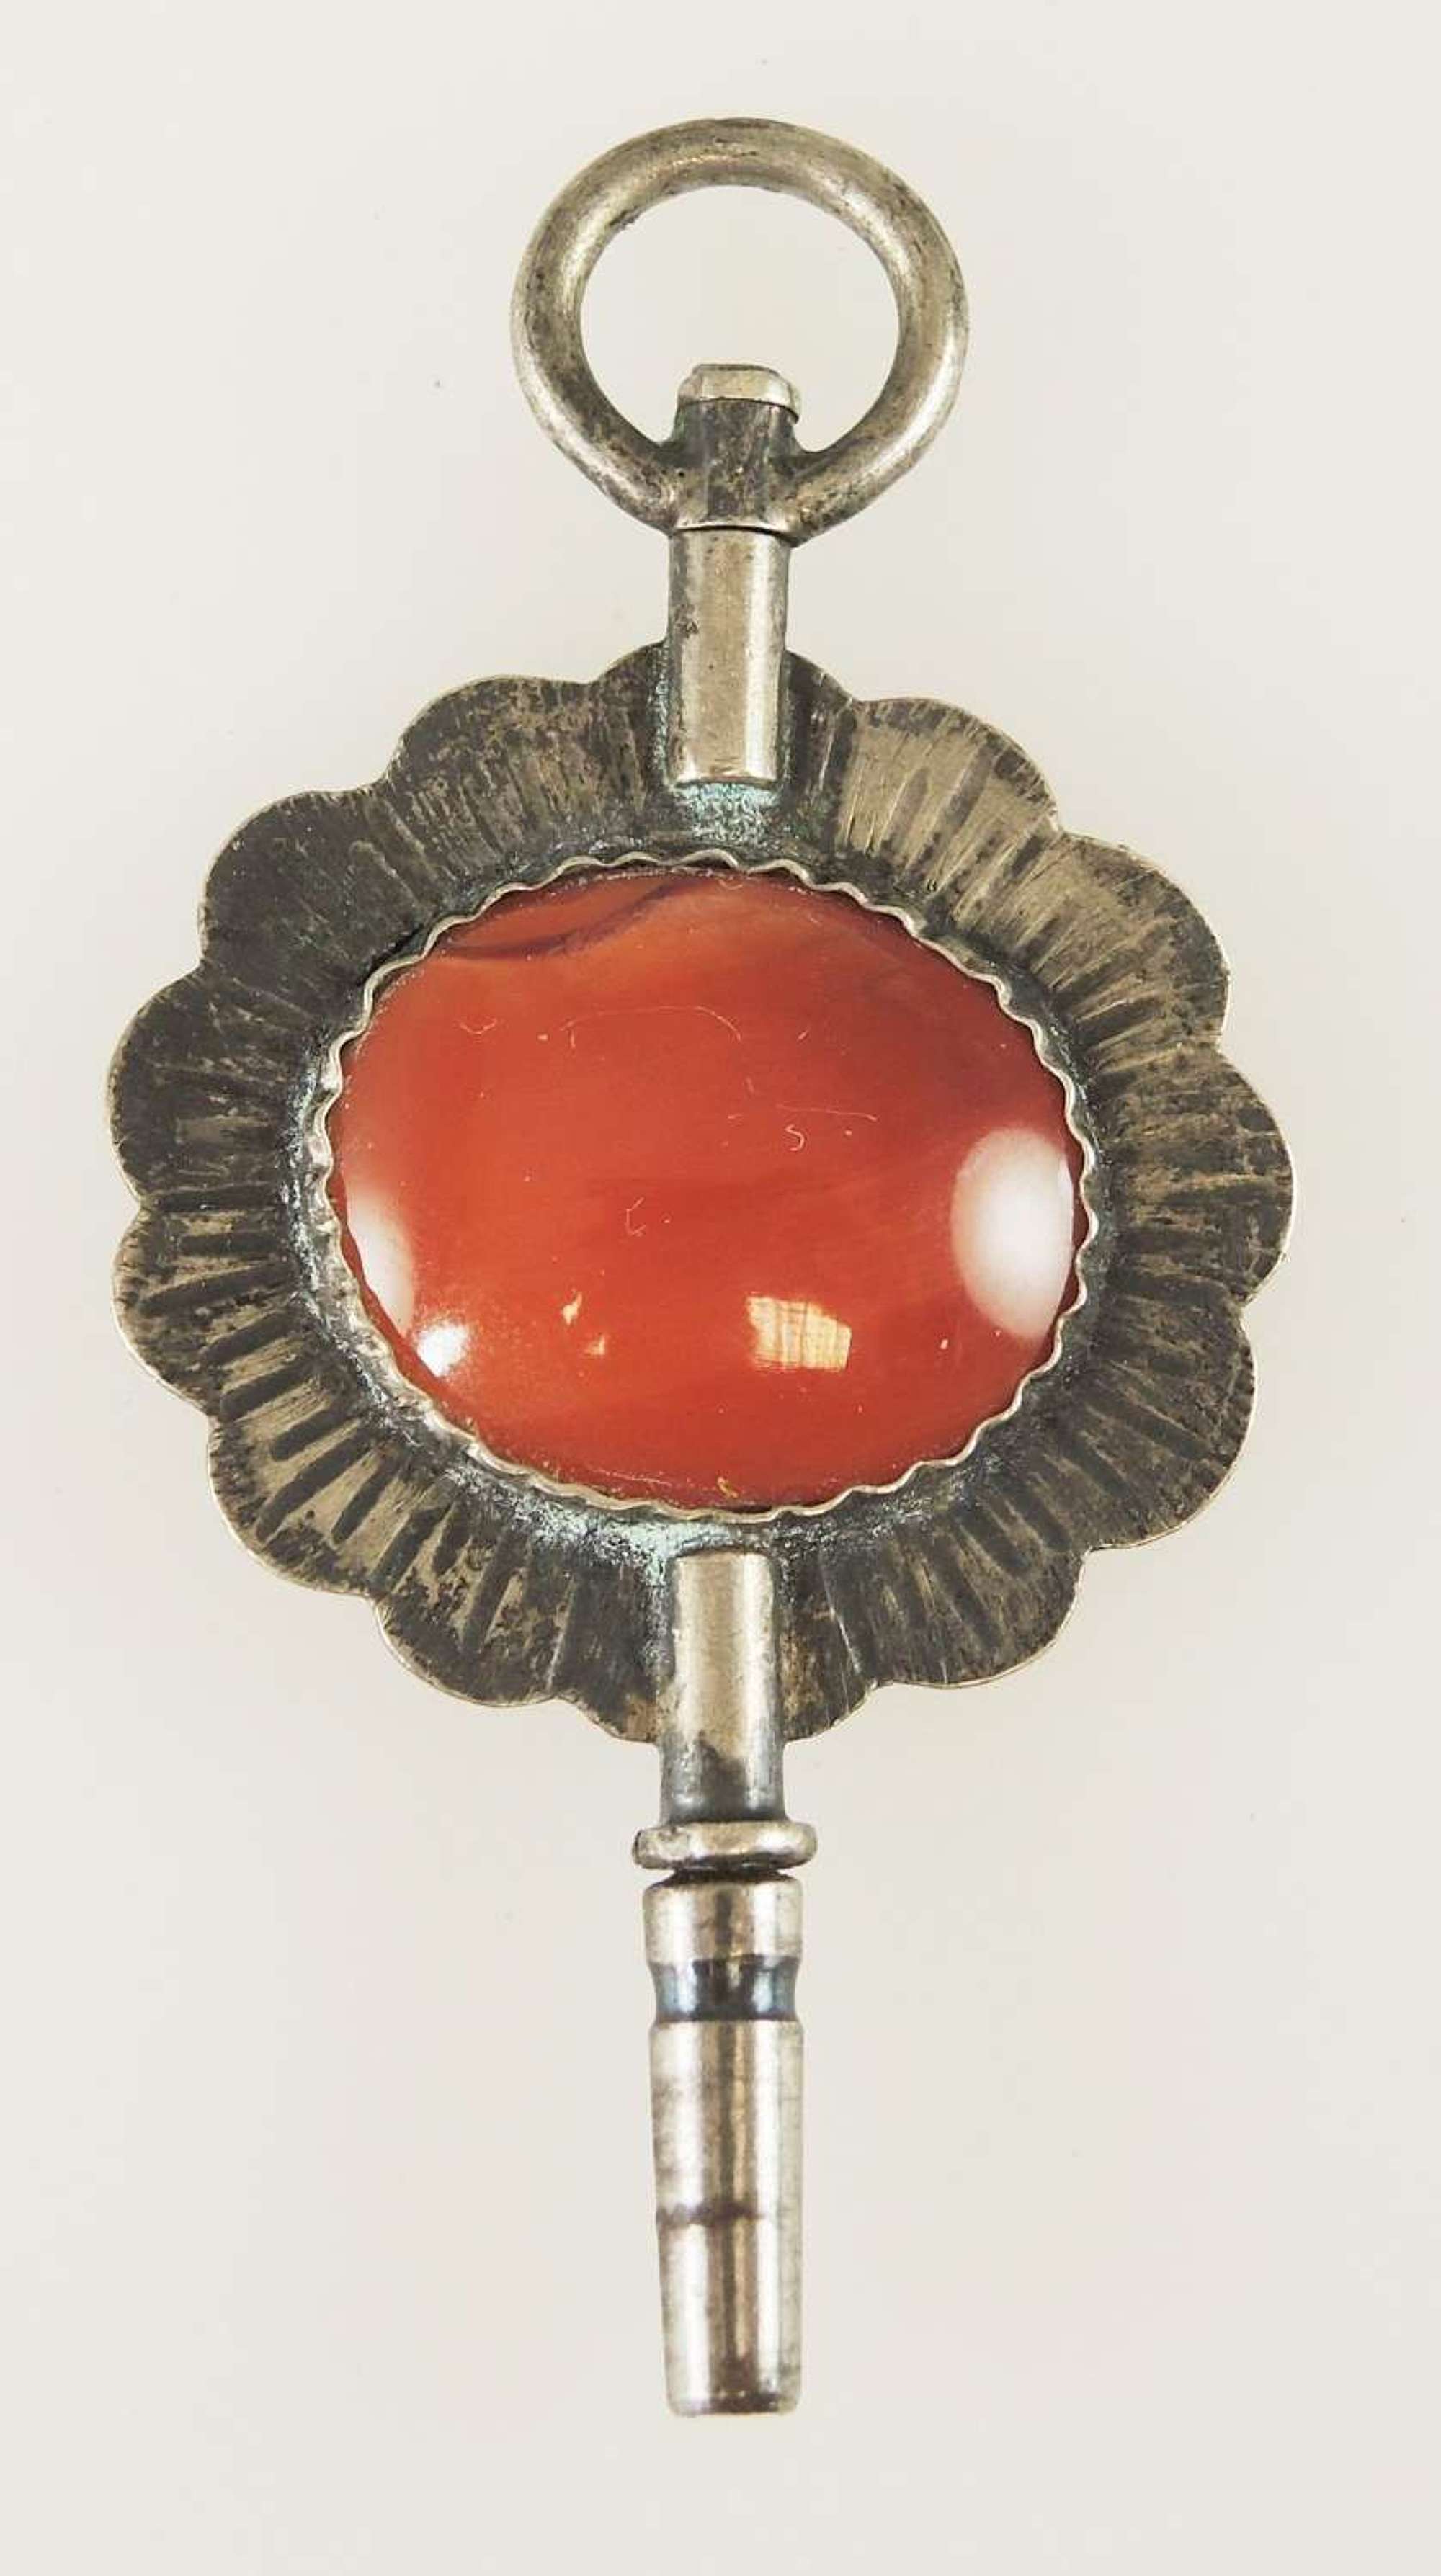 Silver and red stone watch key. c1880